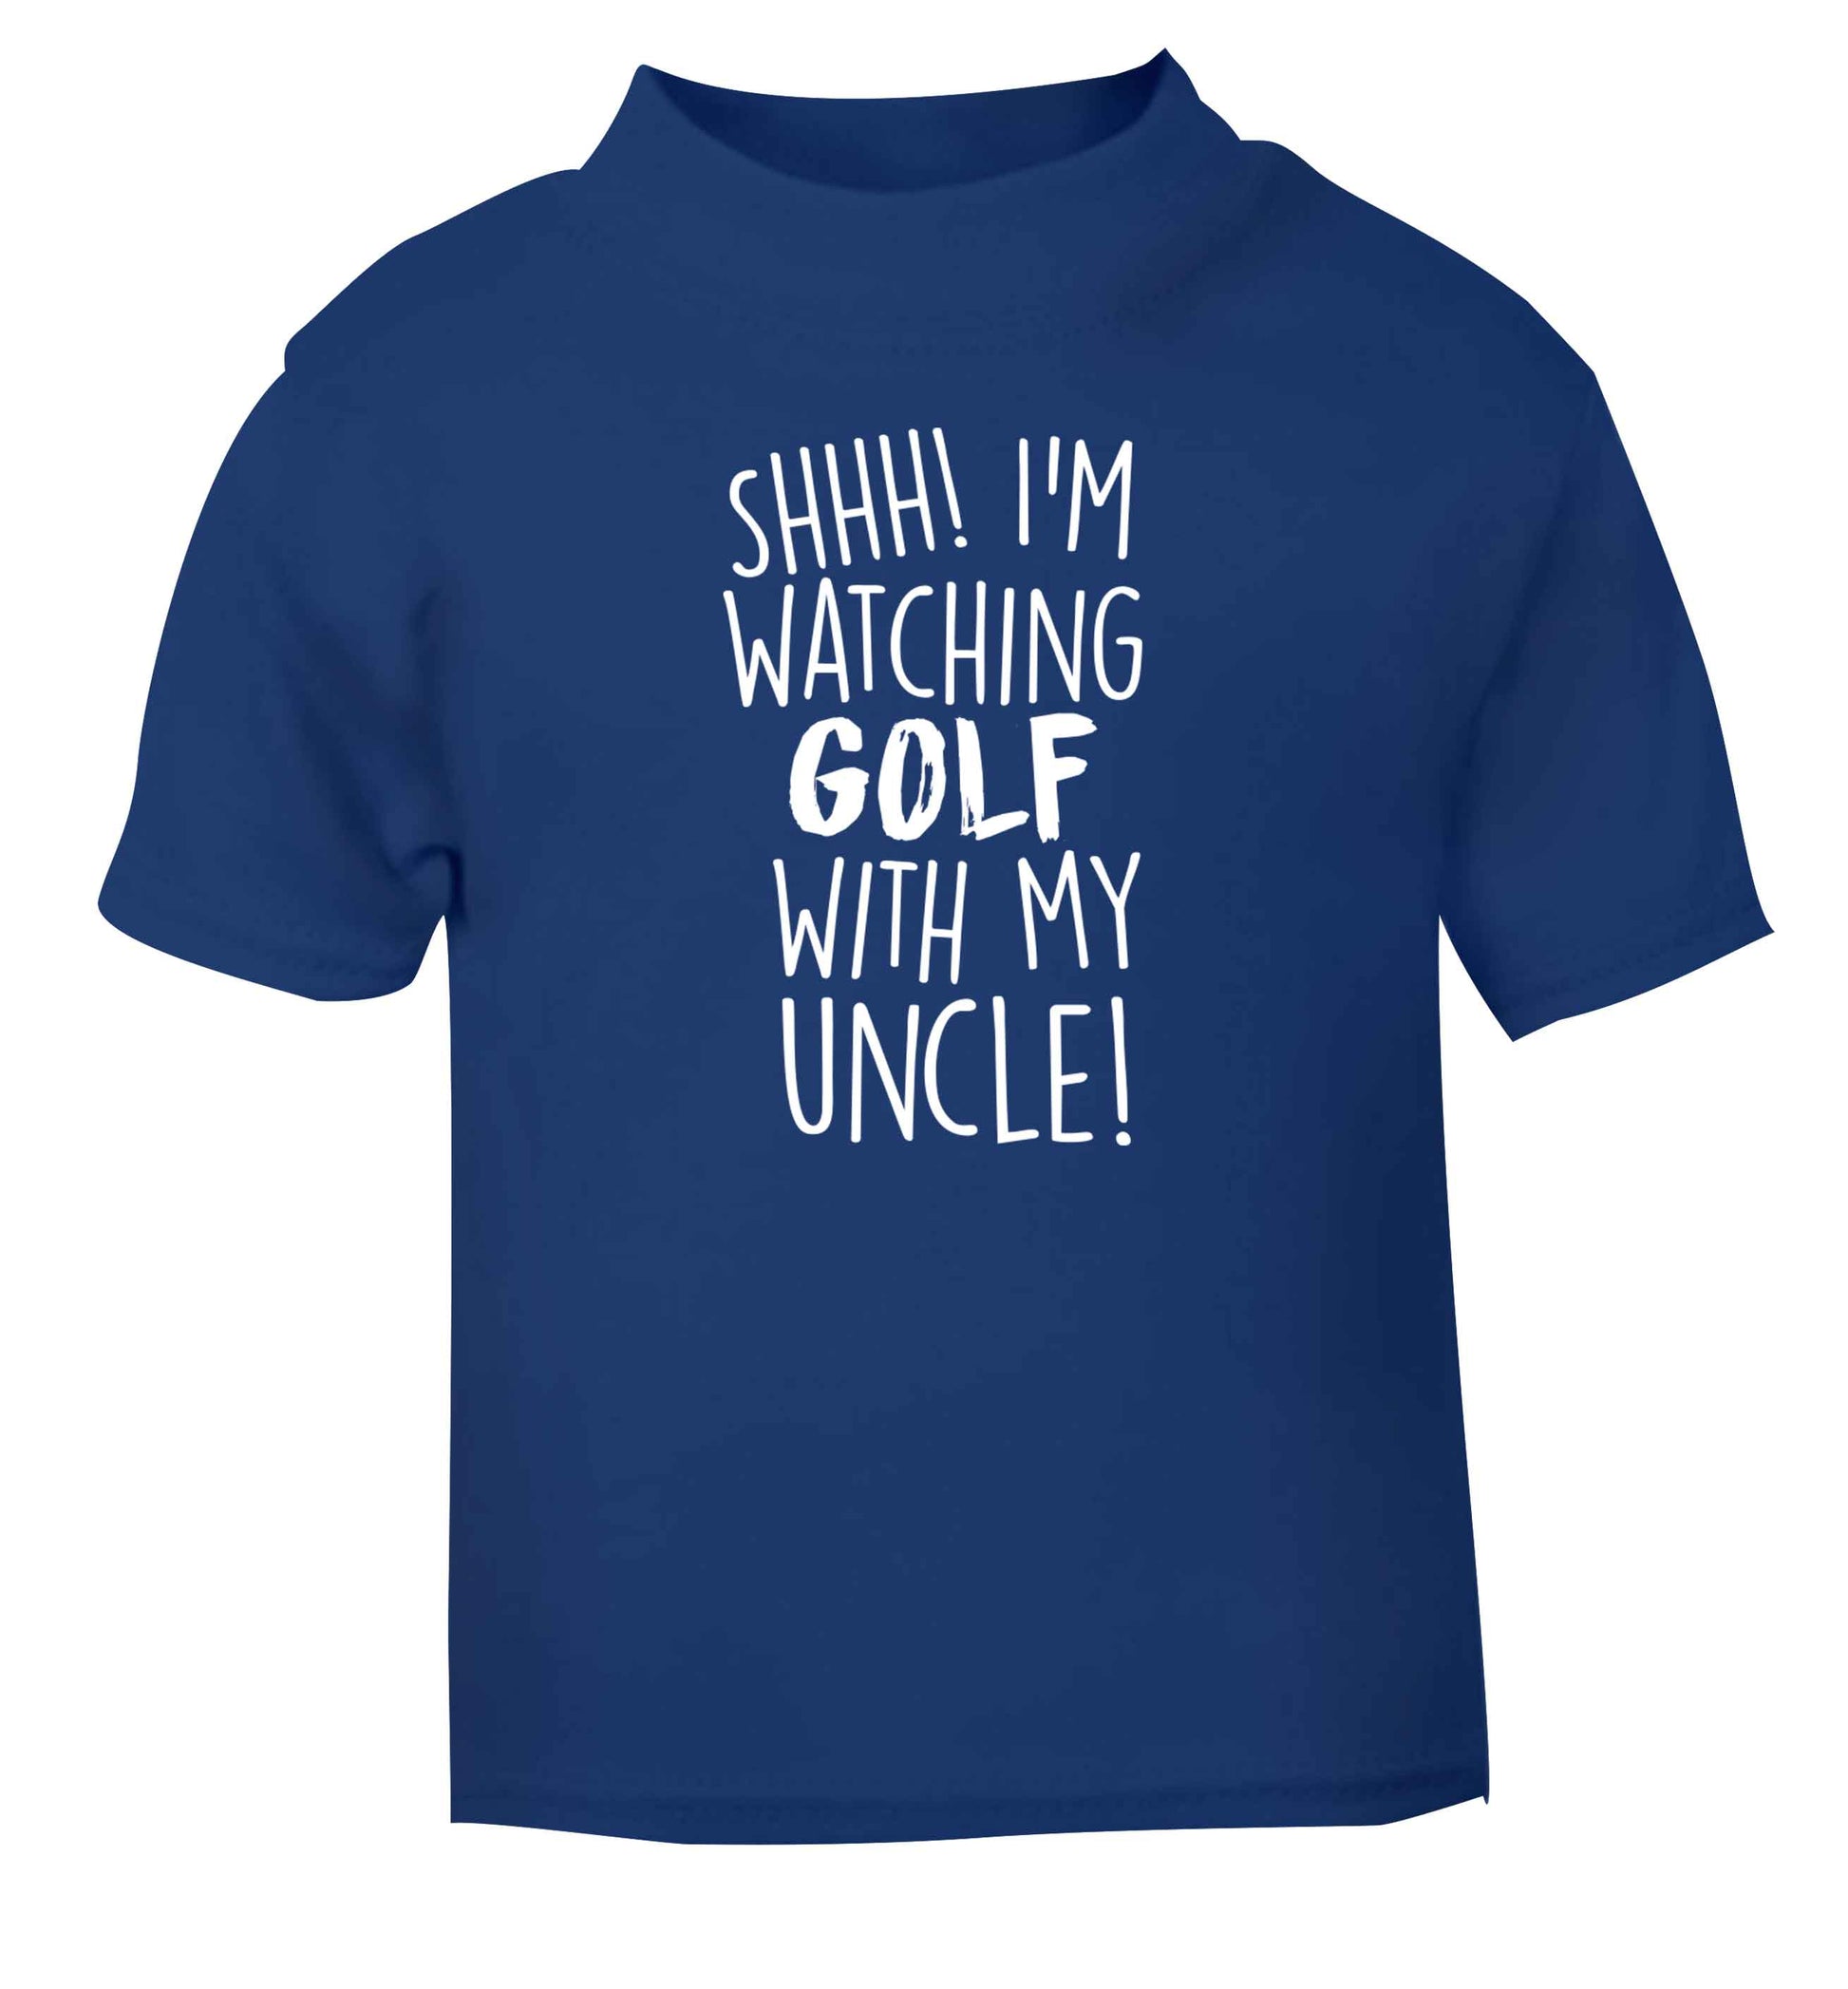 Shh I'm watching golf with my uncle blue Baby Toddler Tshirt 2 Years